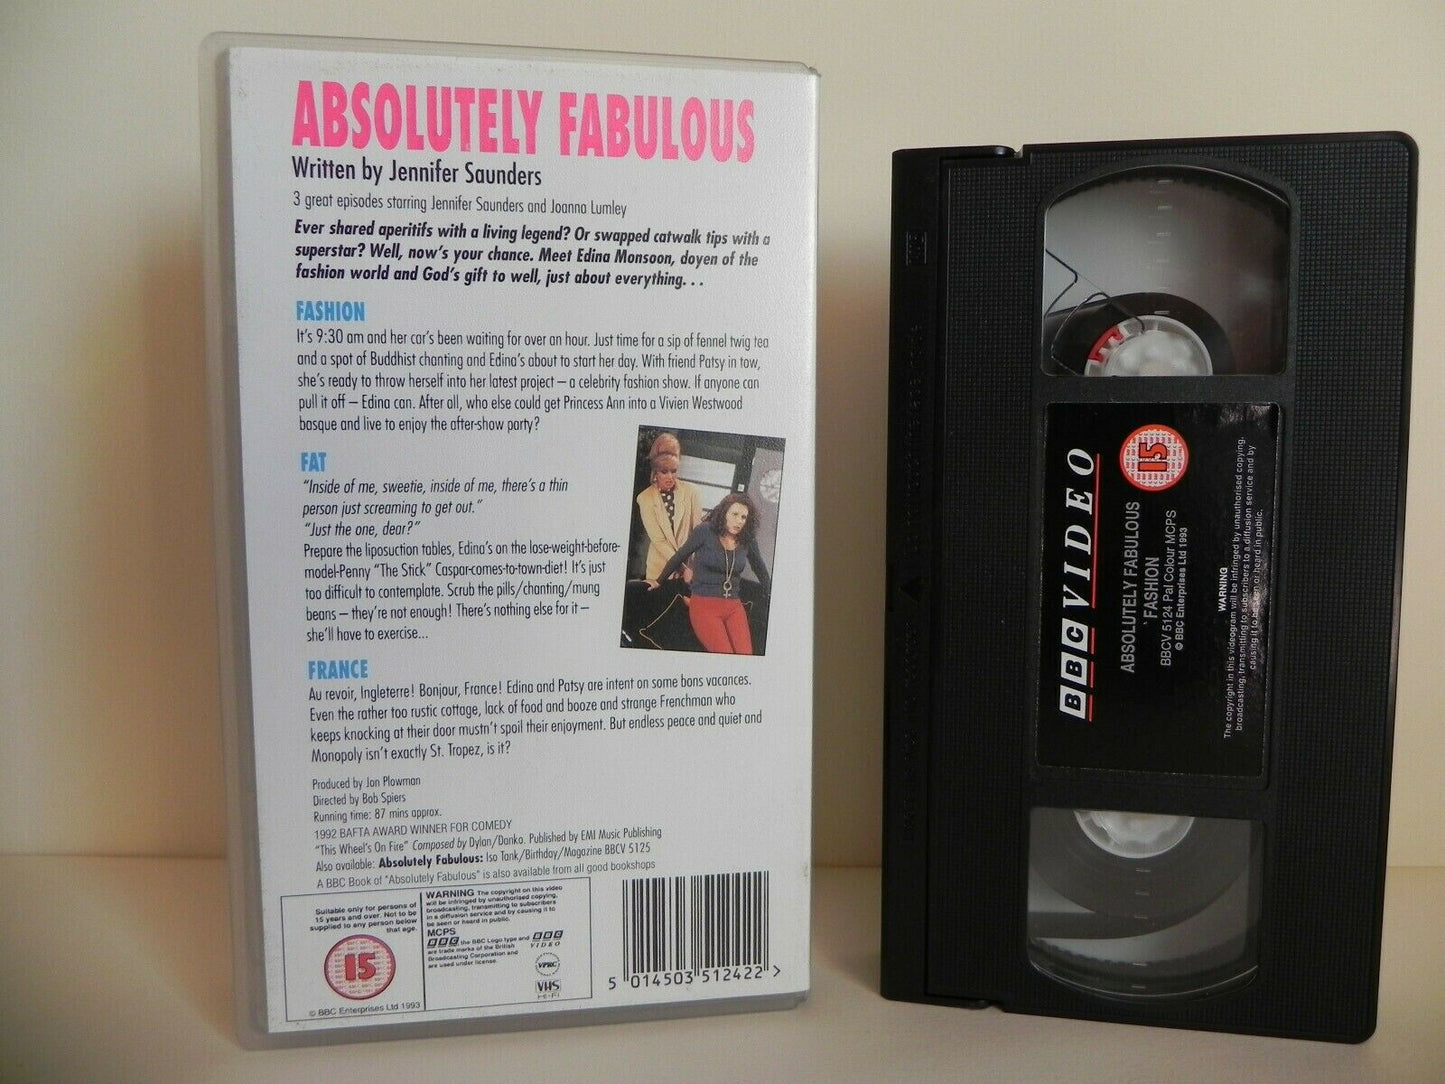 Absolutely Fabulous - BBC - Three Episodes - Fashion - Fat - France - Pal VHS-